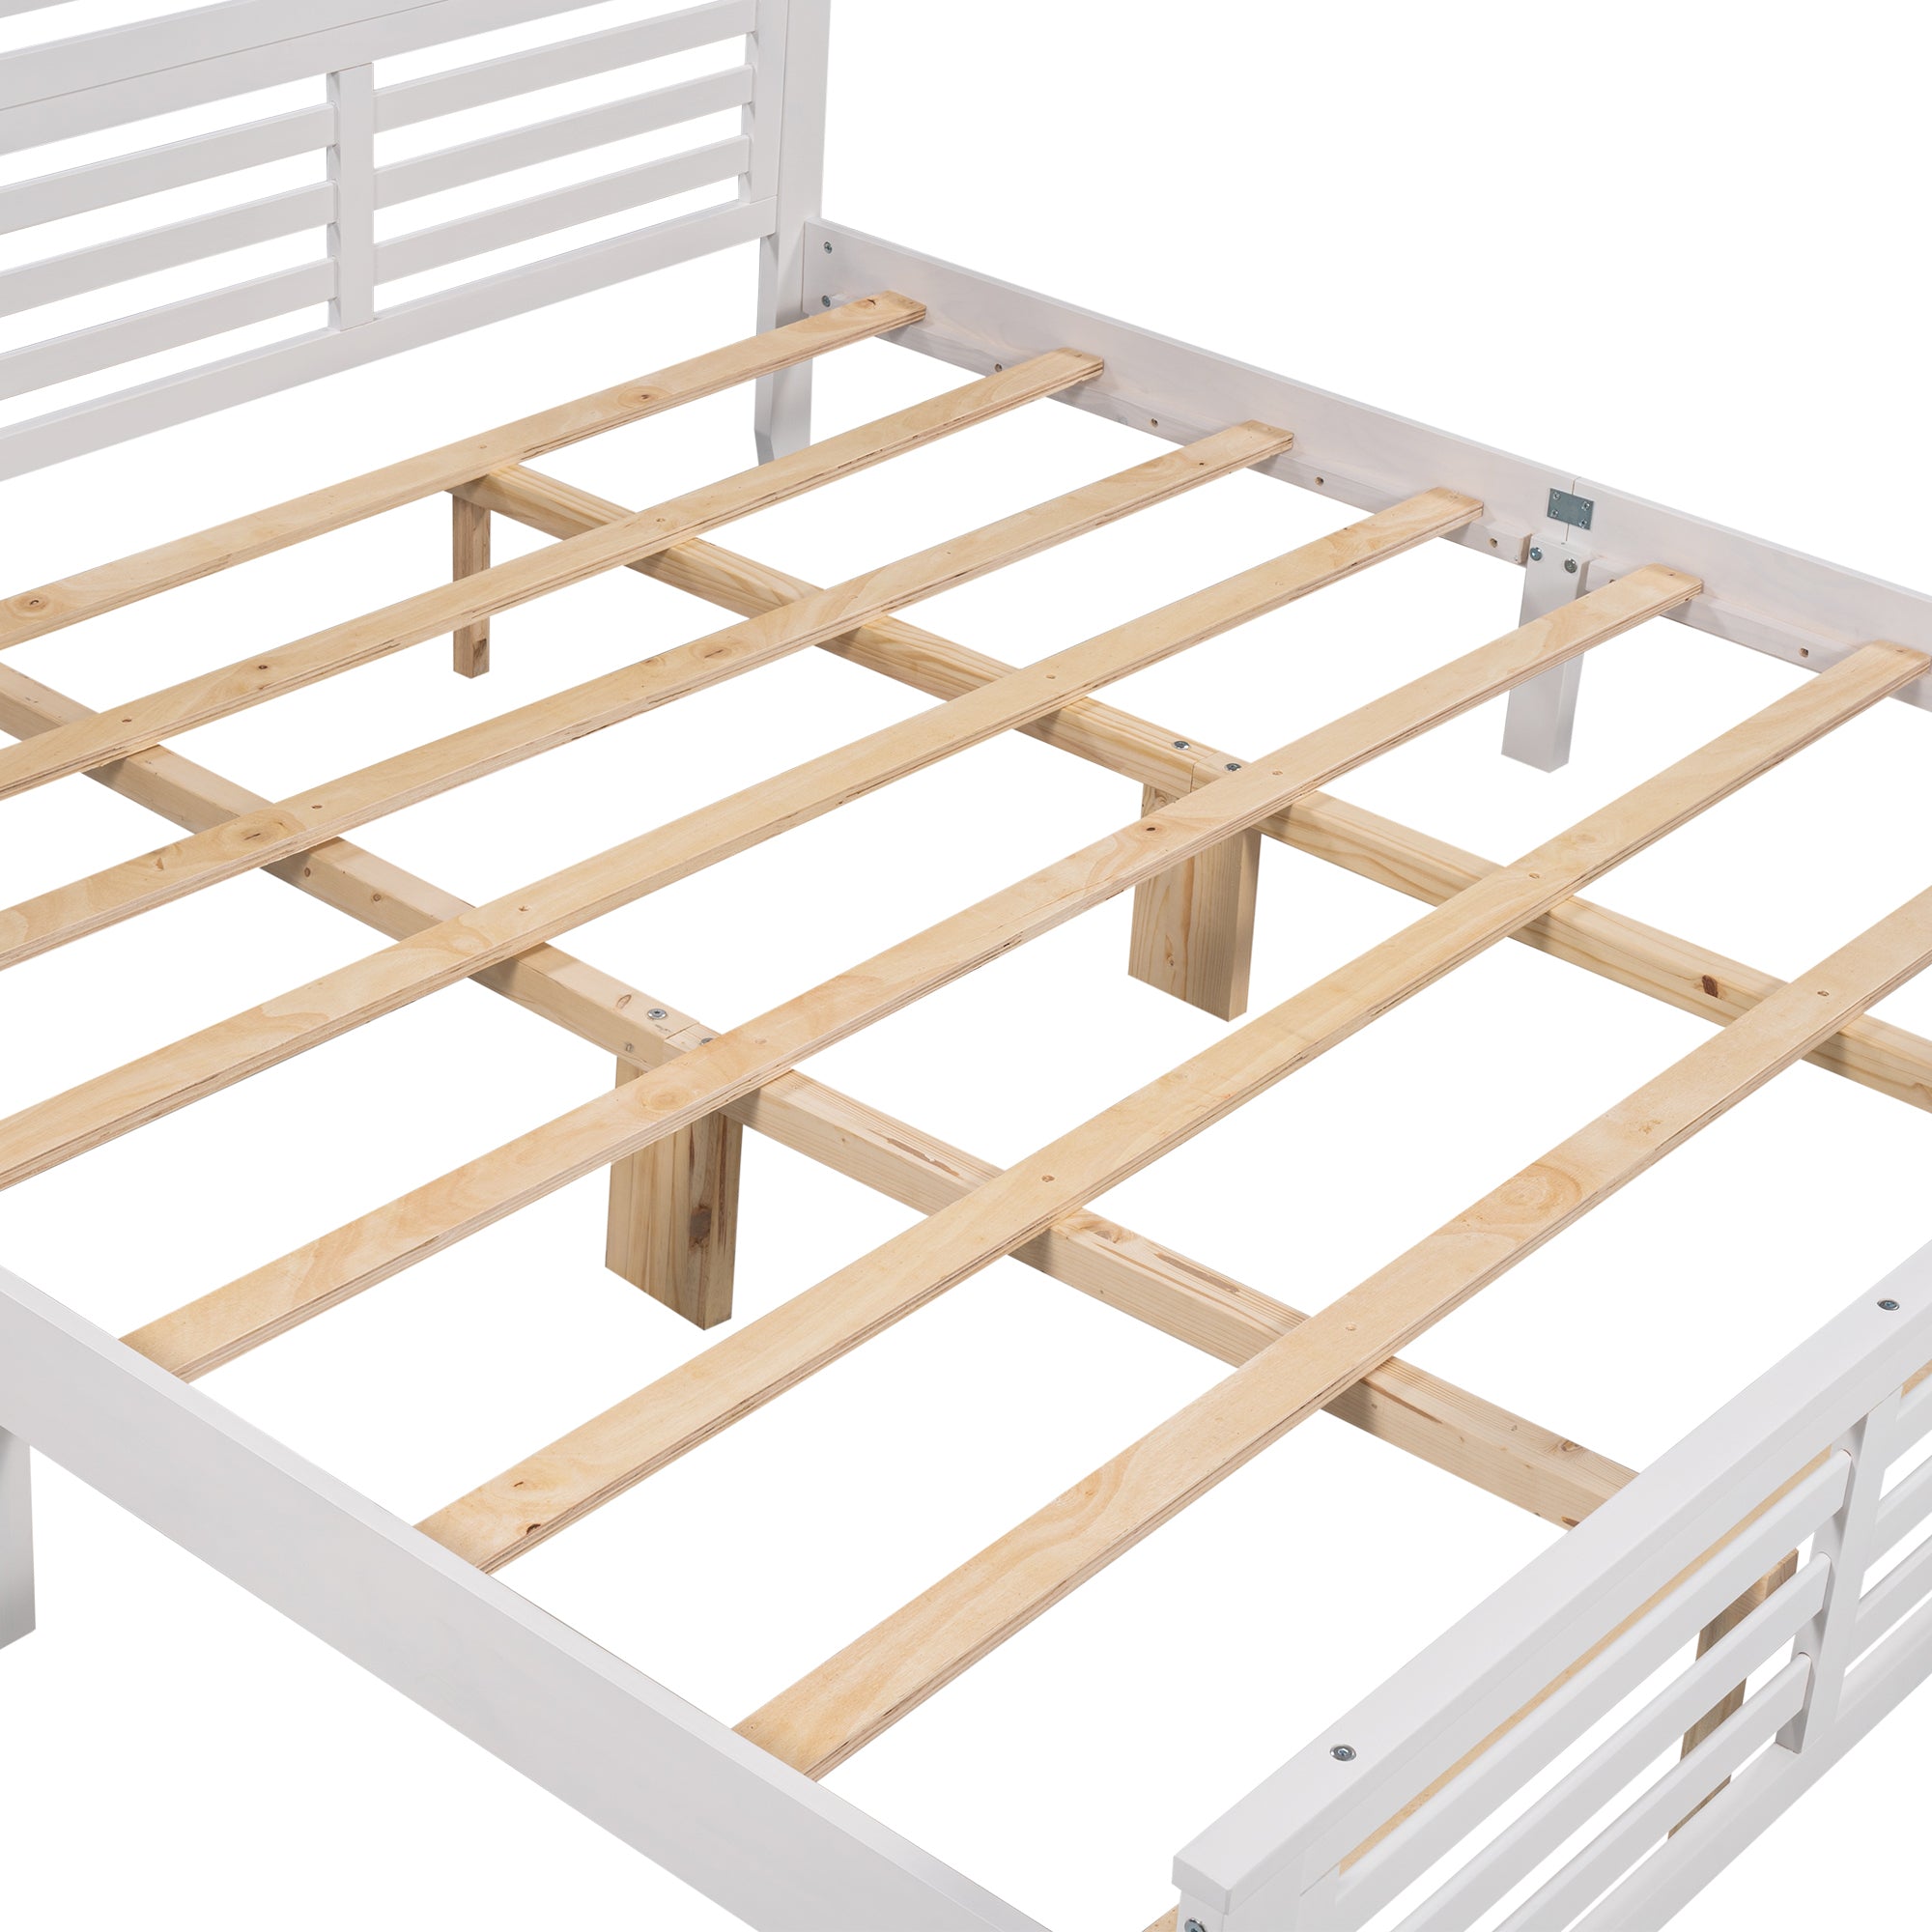 King Size Platform Bed with Horizontal Strip Hollow Shape | White By: Alabama Beds